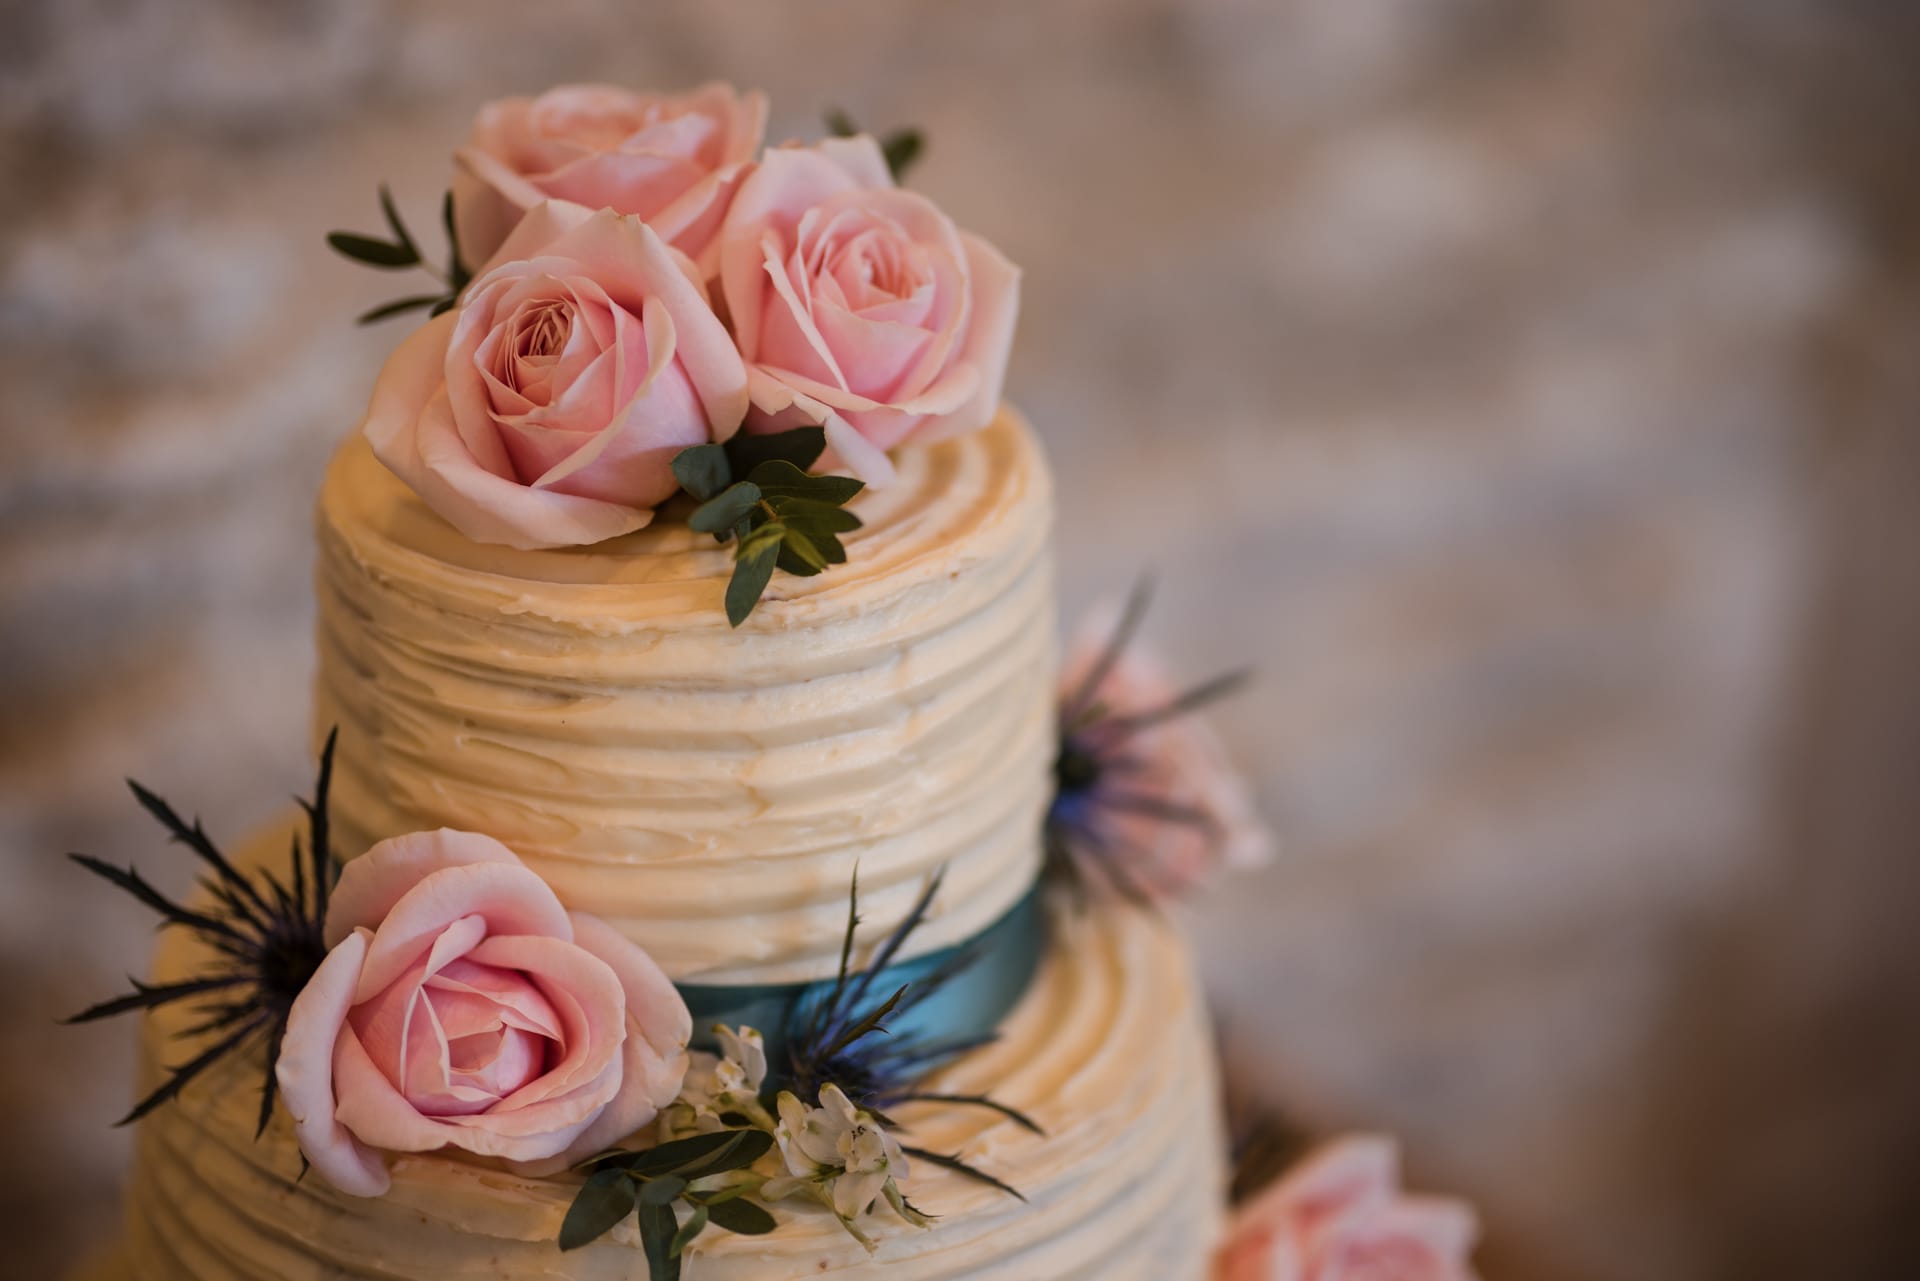 The top tier of wedding cake with pink roses on top at Oxleaze Barn Wedding Venue